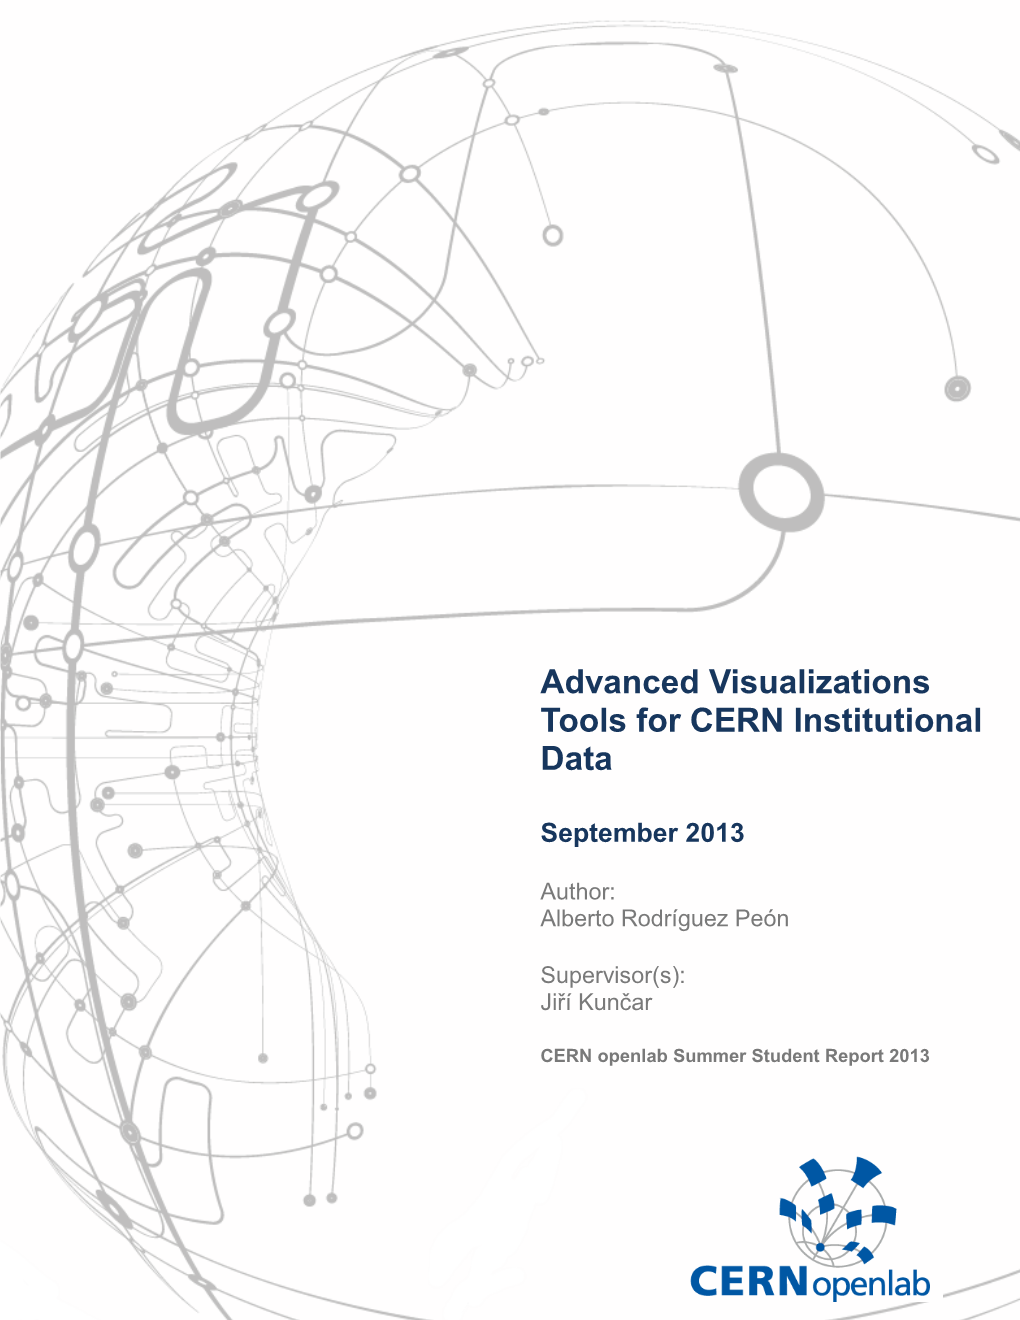 Advanced Visualizations Tools for CERN Institutional Data